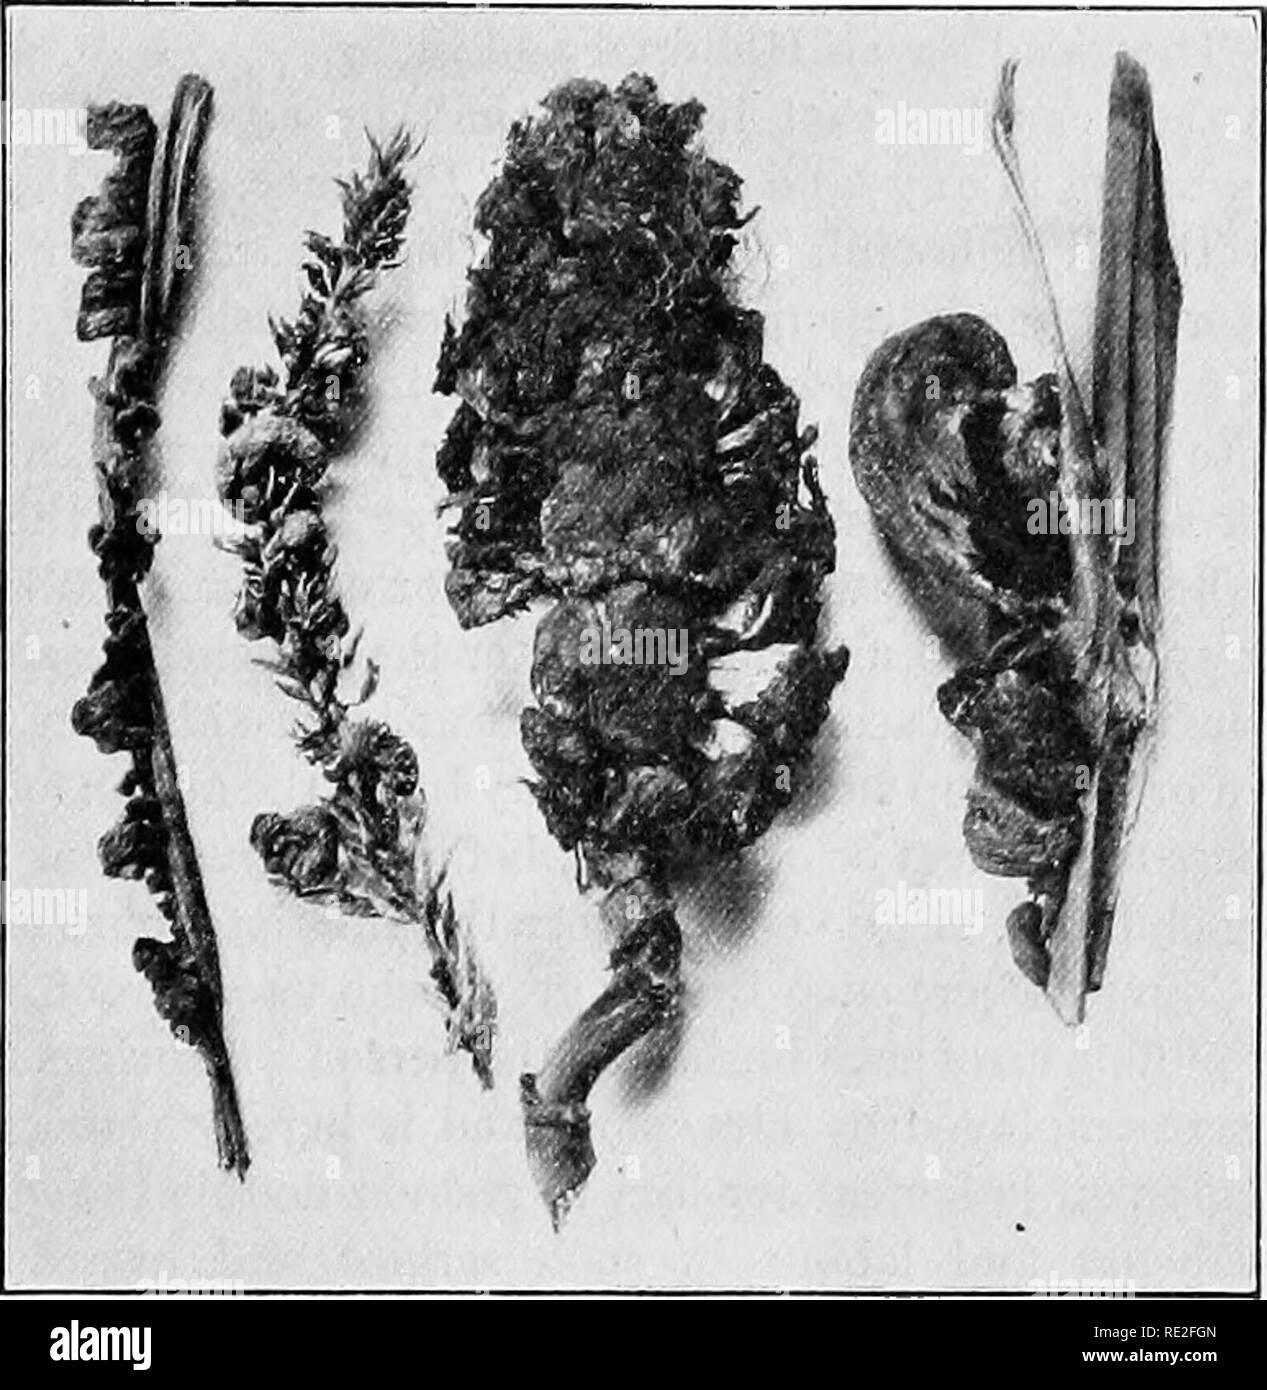 . Fundamentals of botany. Botany. ECONOMIC IMPORTANCE OE EUNGI 299 stem, fruiting in the tissues, and commonly destroying the kernel of grain. The innumerable black spores form a sooty powder—whence the common name of &quot;smut.&quot;. Fig. 221.—Corn-smut {Ustilago.maydis). on stalk, tassel, ear, and leaf of Zea Mays. 286. Rusts.—The Ufe history of the wheat rust {Puc- cinia graminis) was outlined in Chapter XIX. This fungus has not only caused millions of dollars worth of damage to the wheat crop of the world but has been the cause of legislative enactments. As early as 1760 there was passed Stock Photo